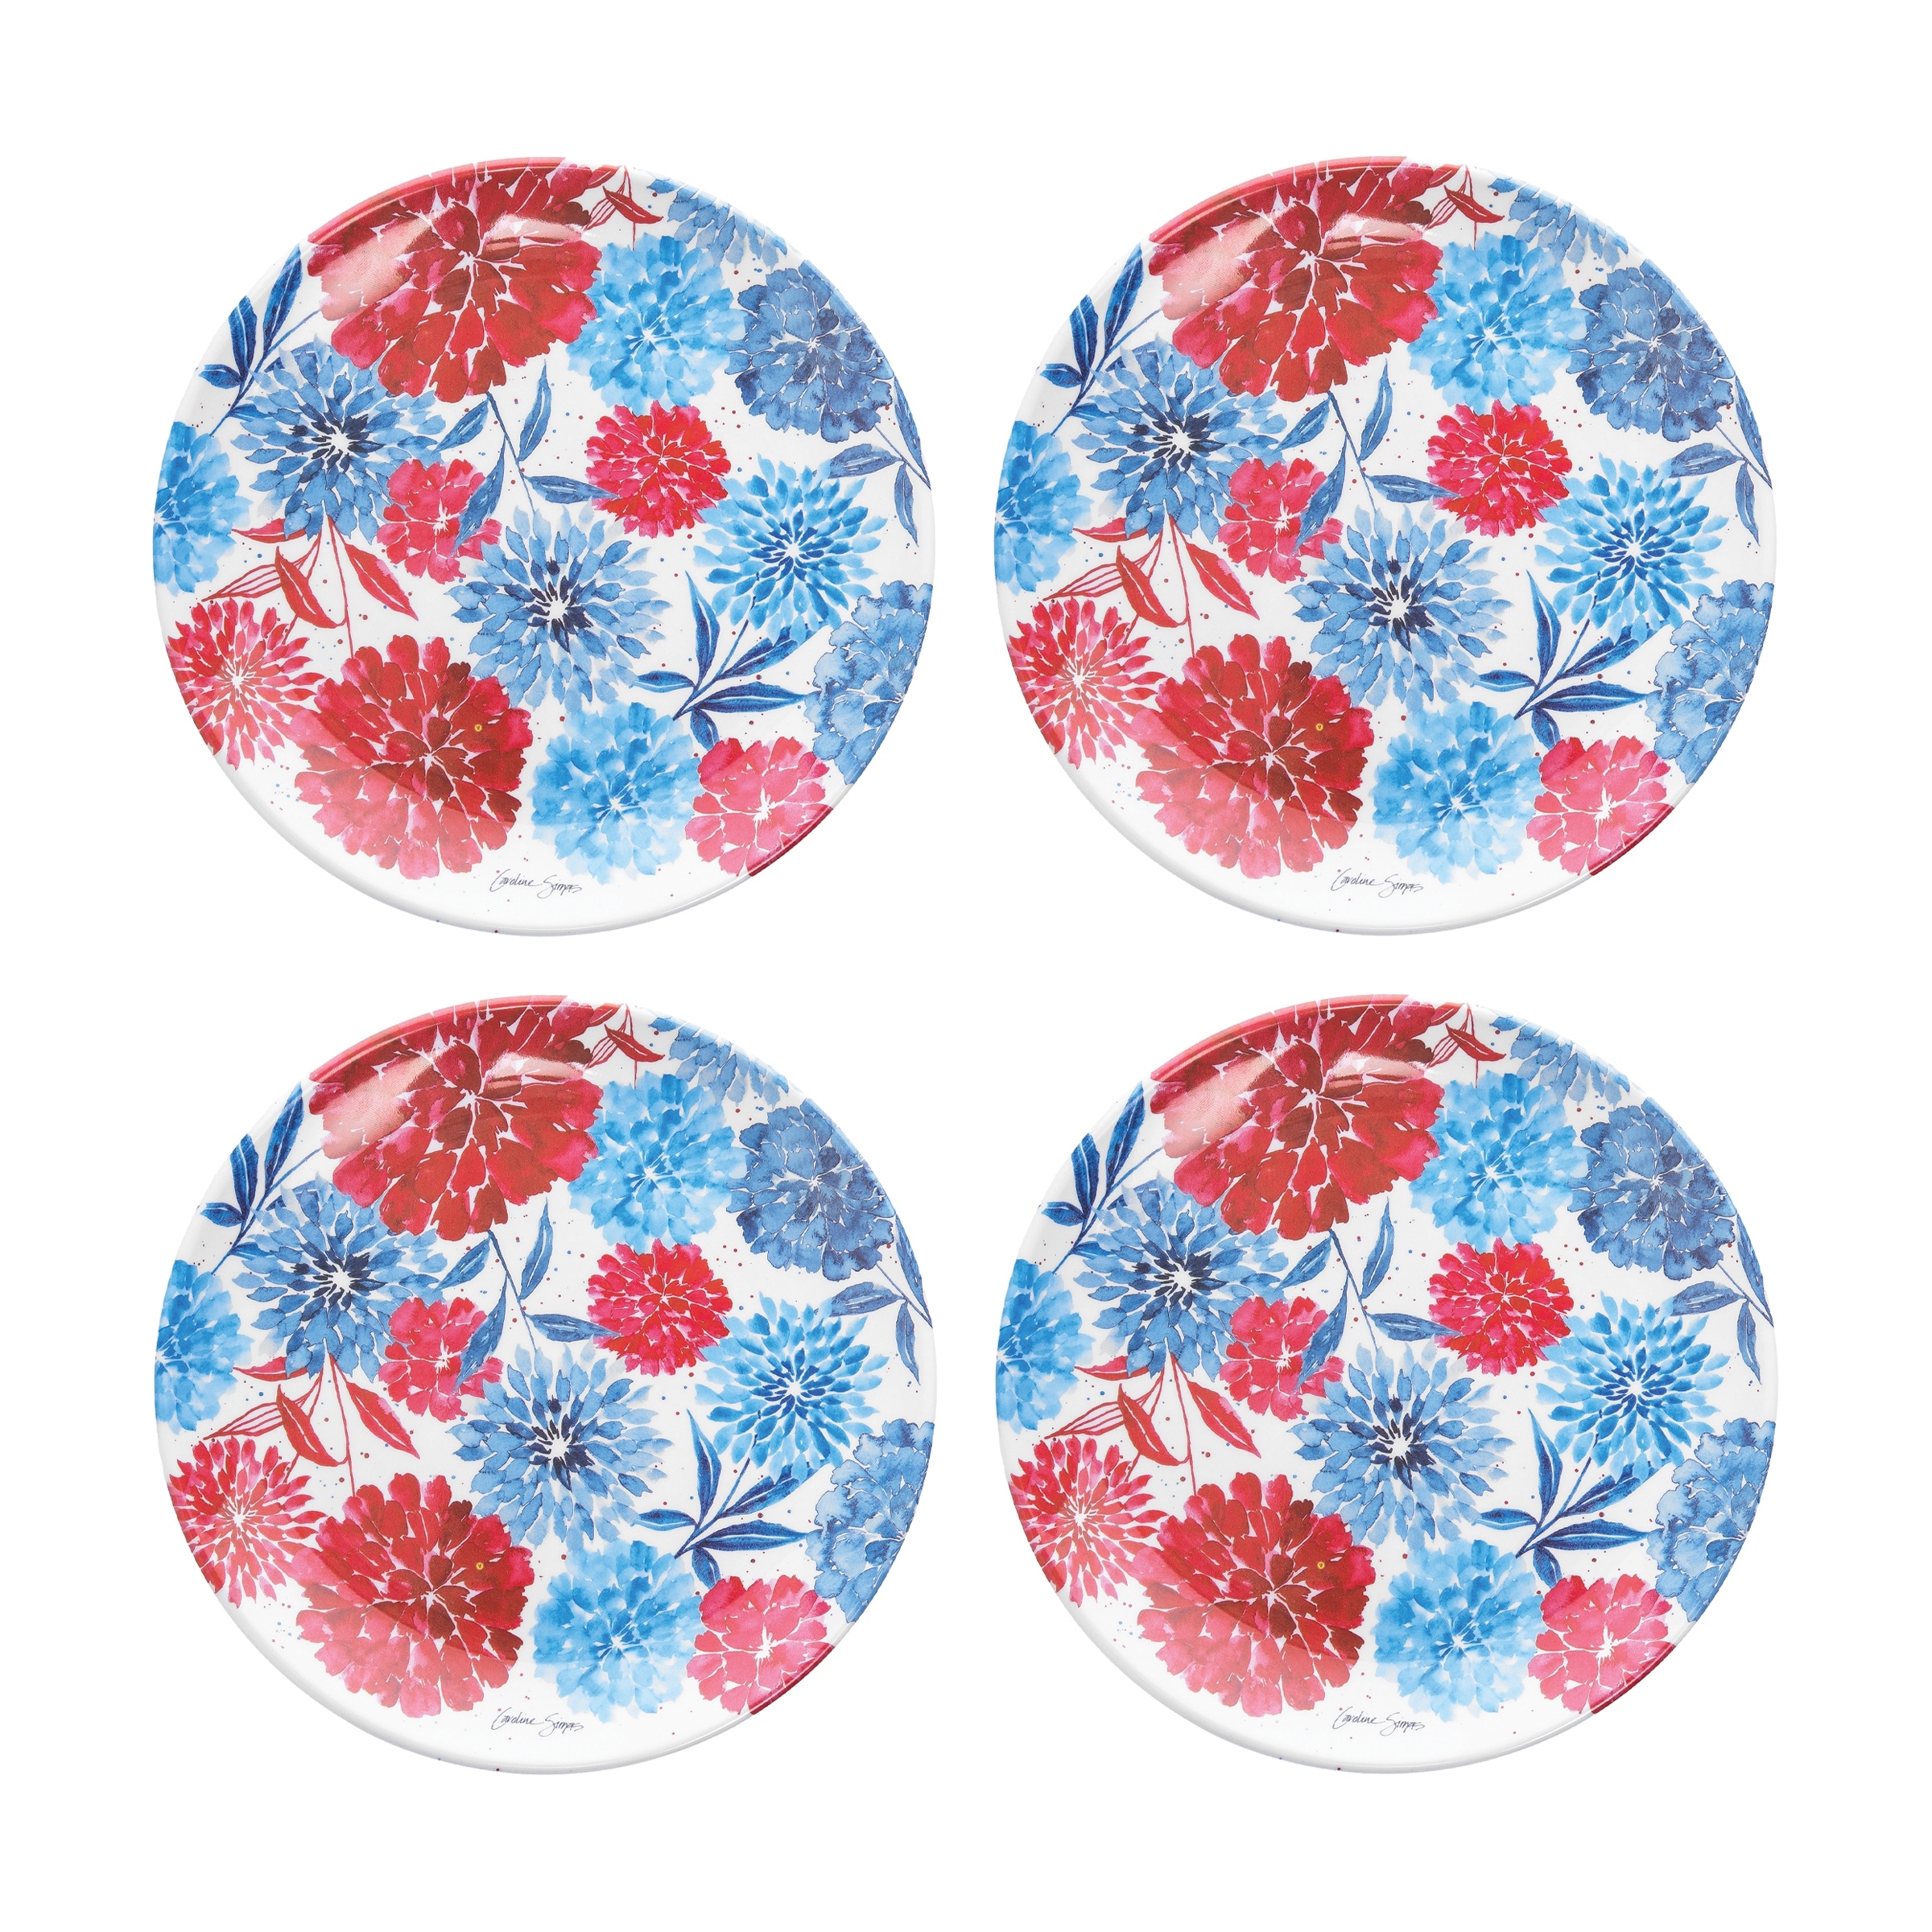 Southern Living Patriotic Americana July 4th Melamine 8.25” Plates Set of 4 New 